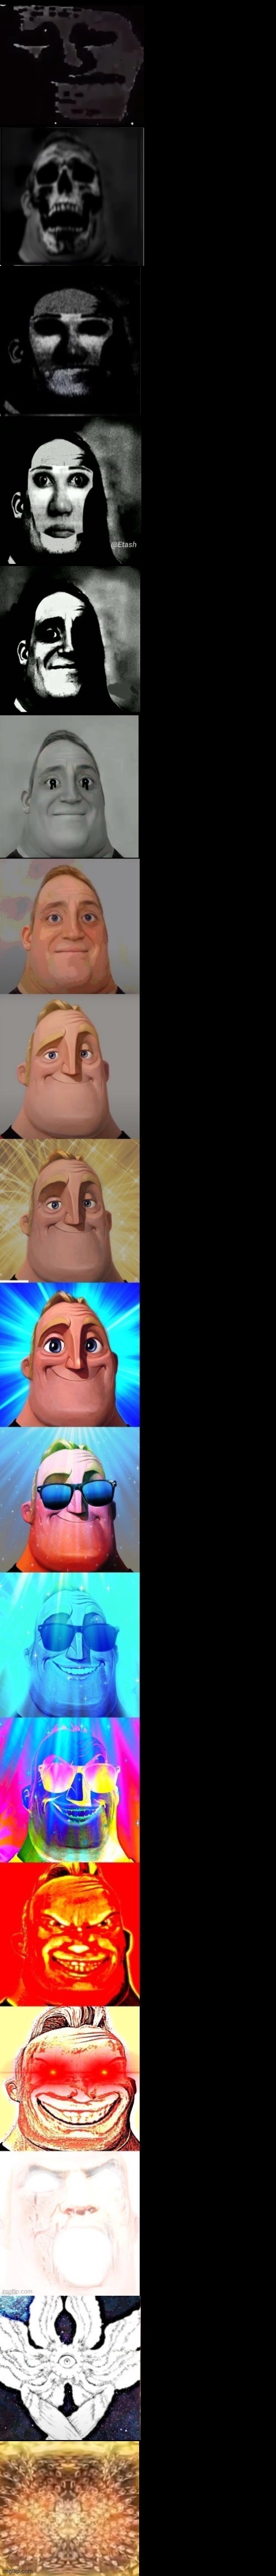 Mr incredible becoming trollge to god but it's hd | image tagged in mr incredible from trollge to god,mr incredible,uncanny | made w/ Imgflip meme maker